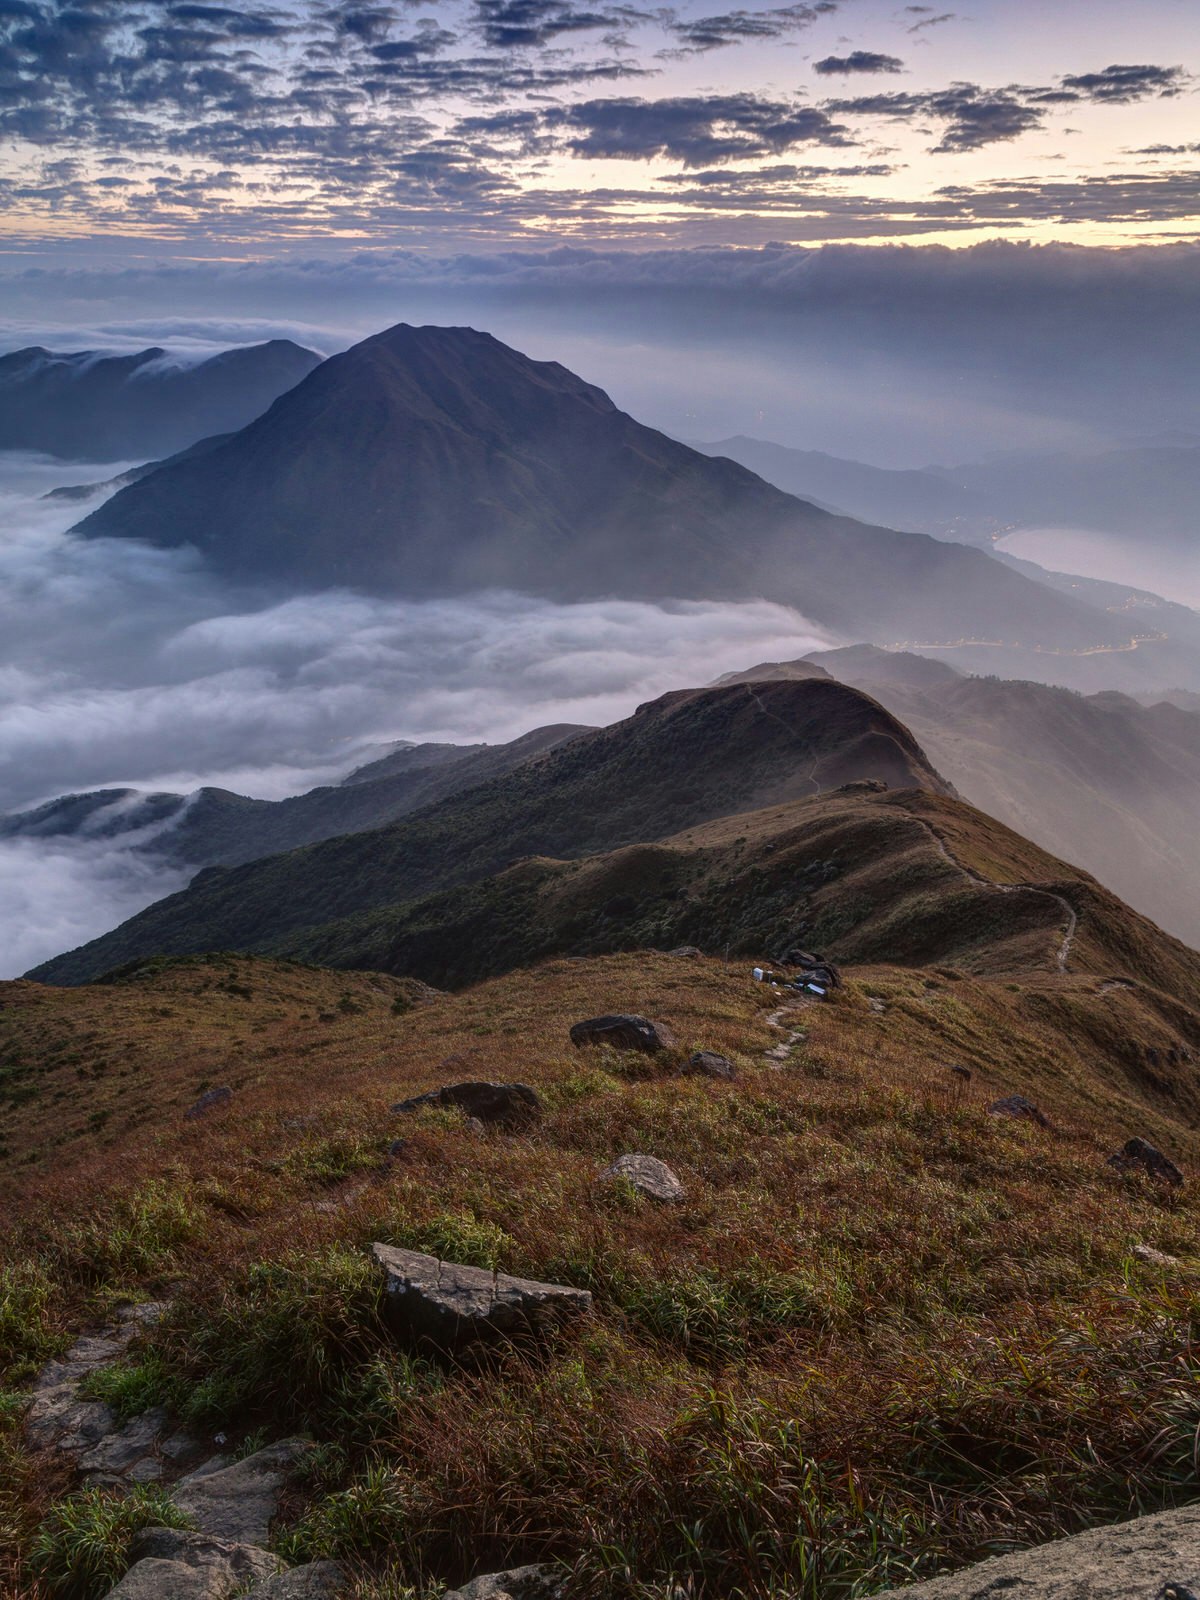 Clouds rolling over mountain on Lantau Island, viewed from the Lantau Peak (the second highest peak in Hong Kong, China) at dawn.